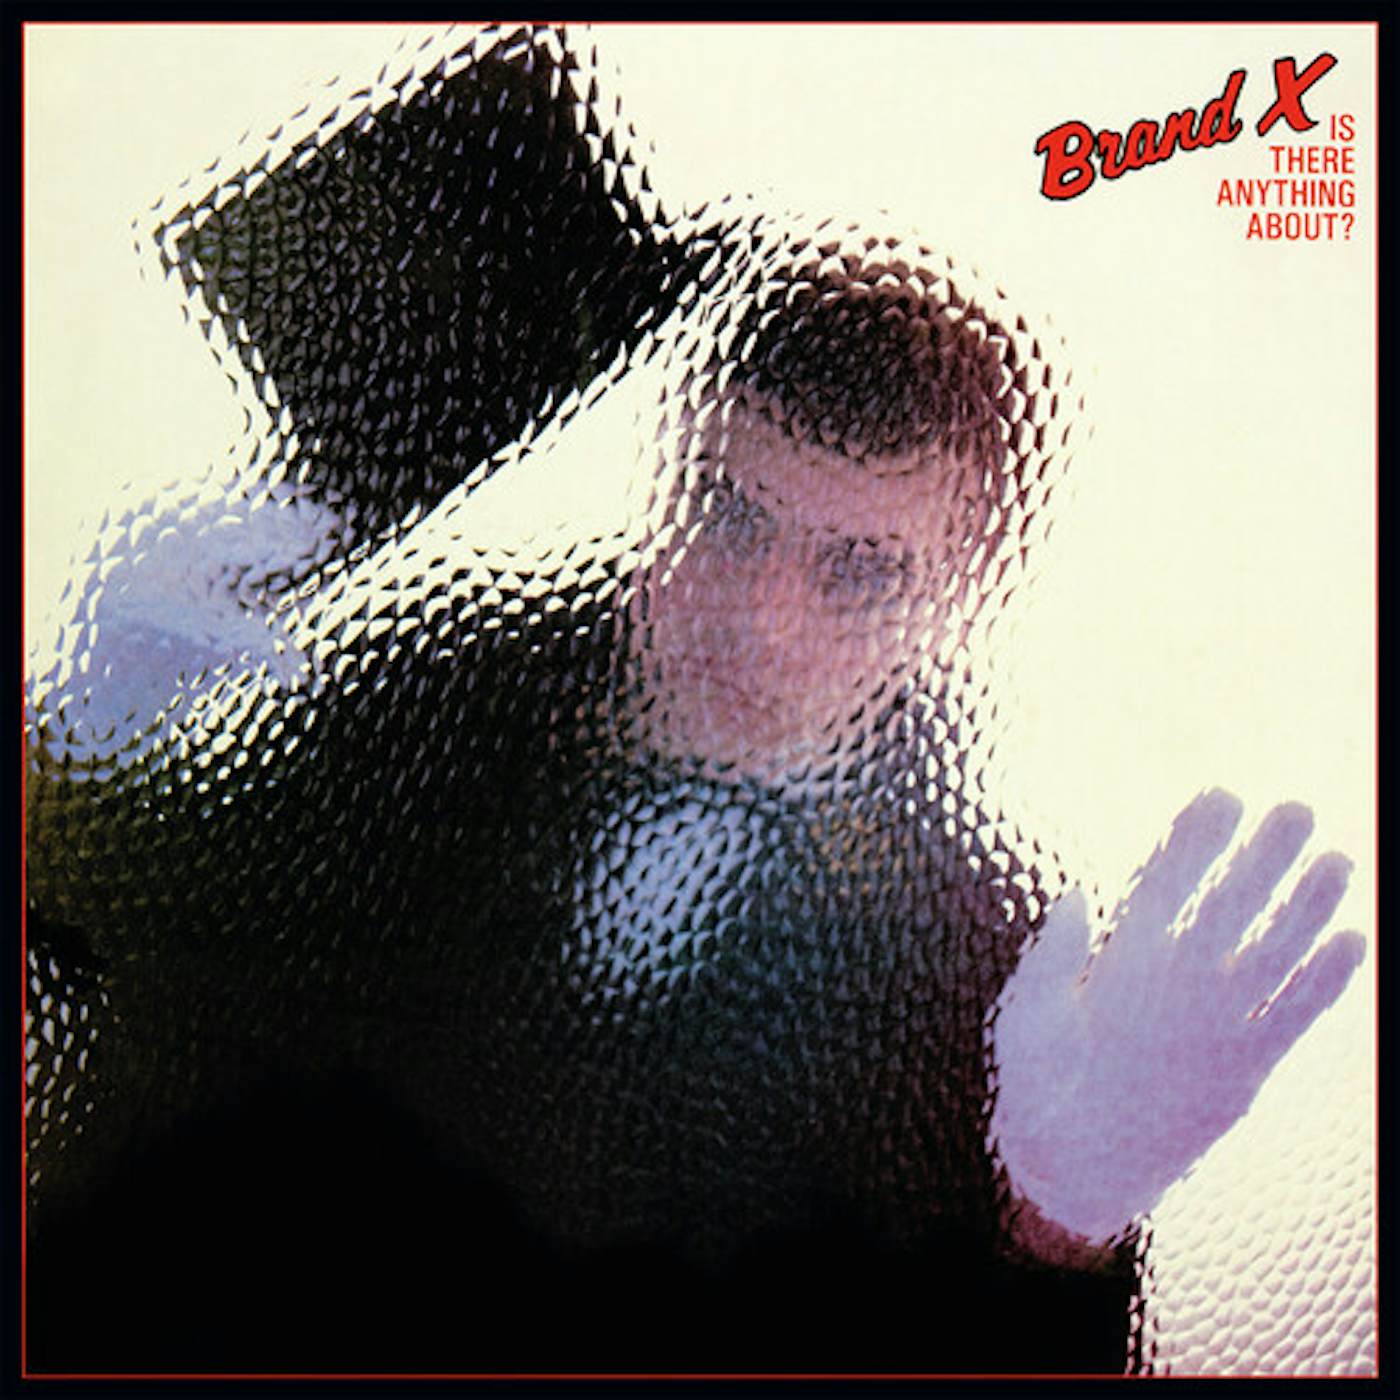 Brand X IS THERE ANYTHING ABOUT Vinyl Record